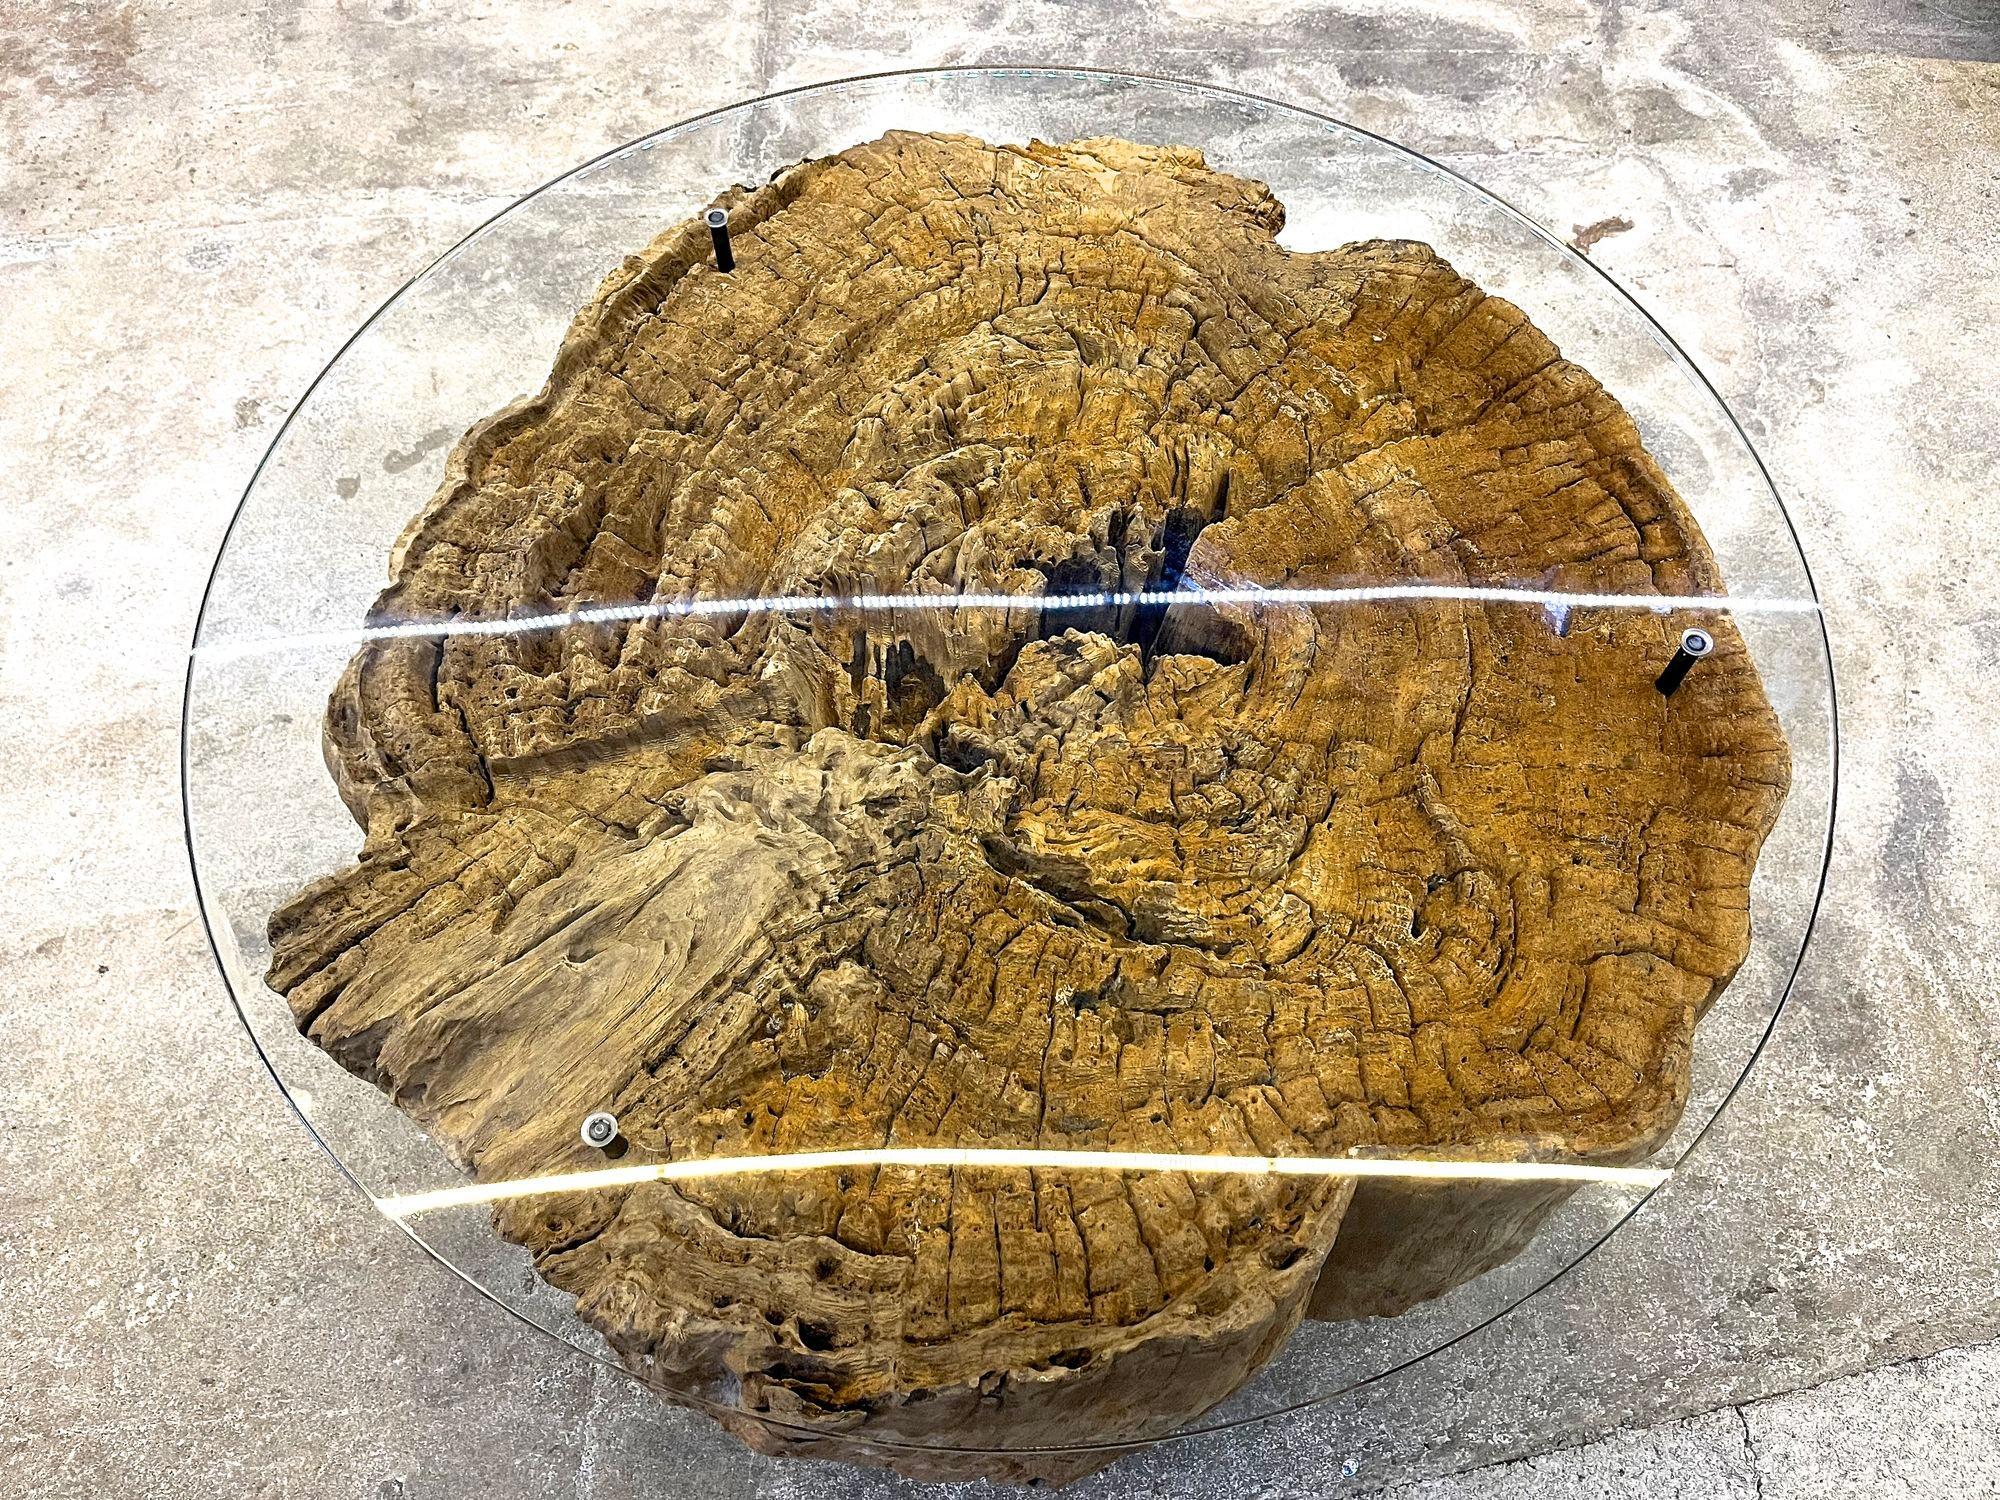 Extraordinary round driftwood sofa table or coffee table with safety glass plate. This one of a kind modern organic side table was artfully crafted by the artist using a massive round disc of a very old piece of teak driftwood. Placed on a round